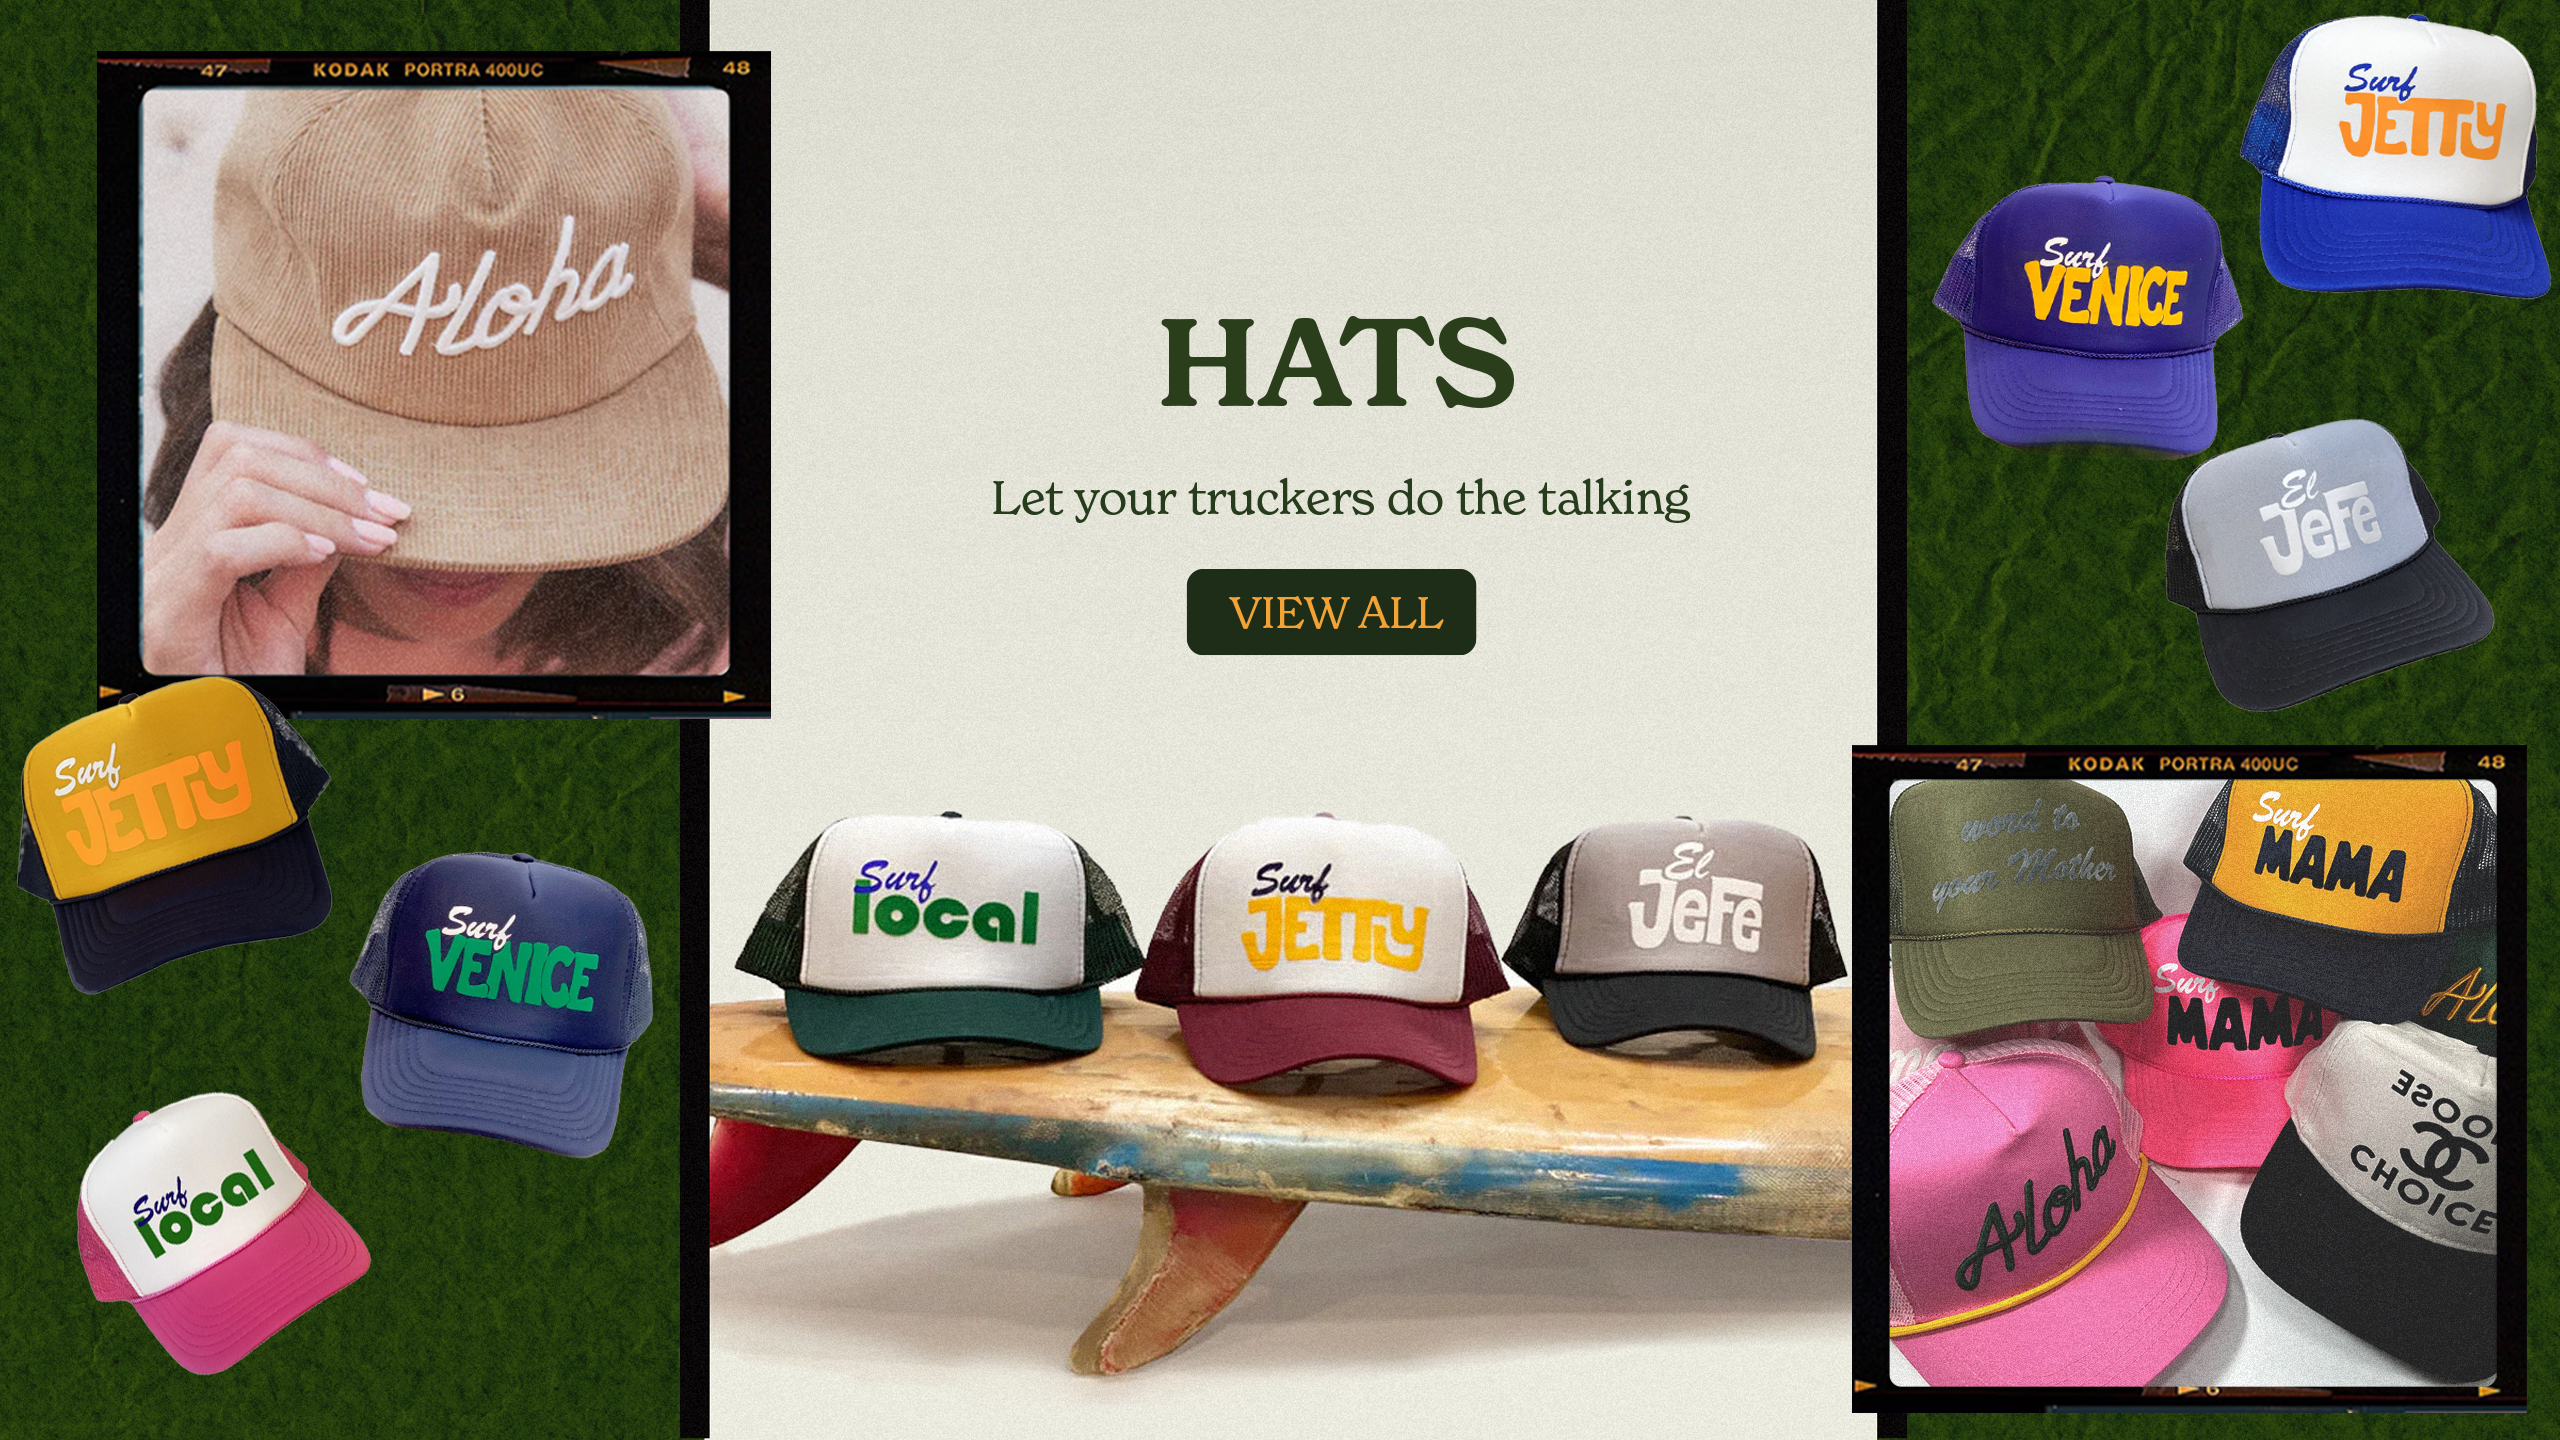 Shop hats. Let your trucker do the talking